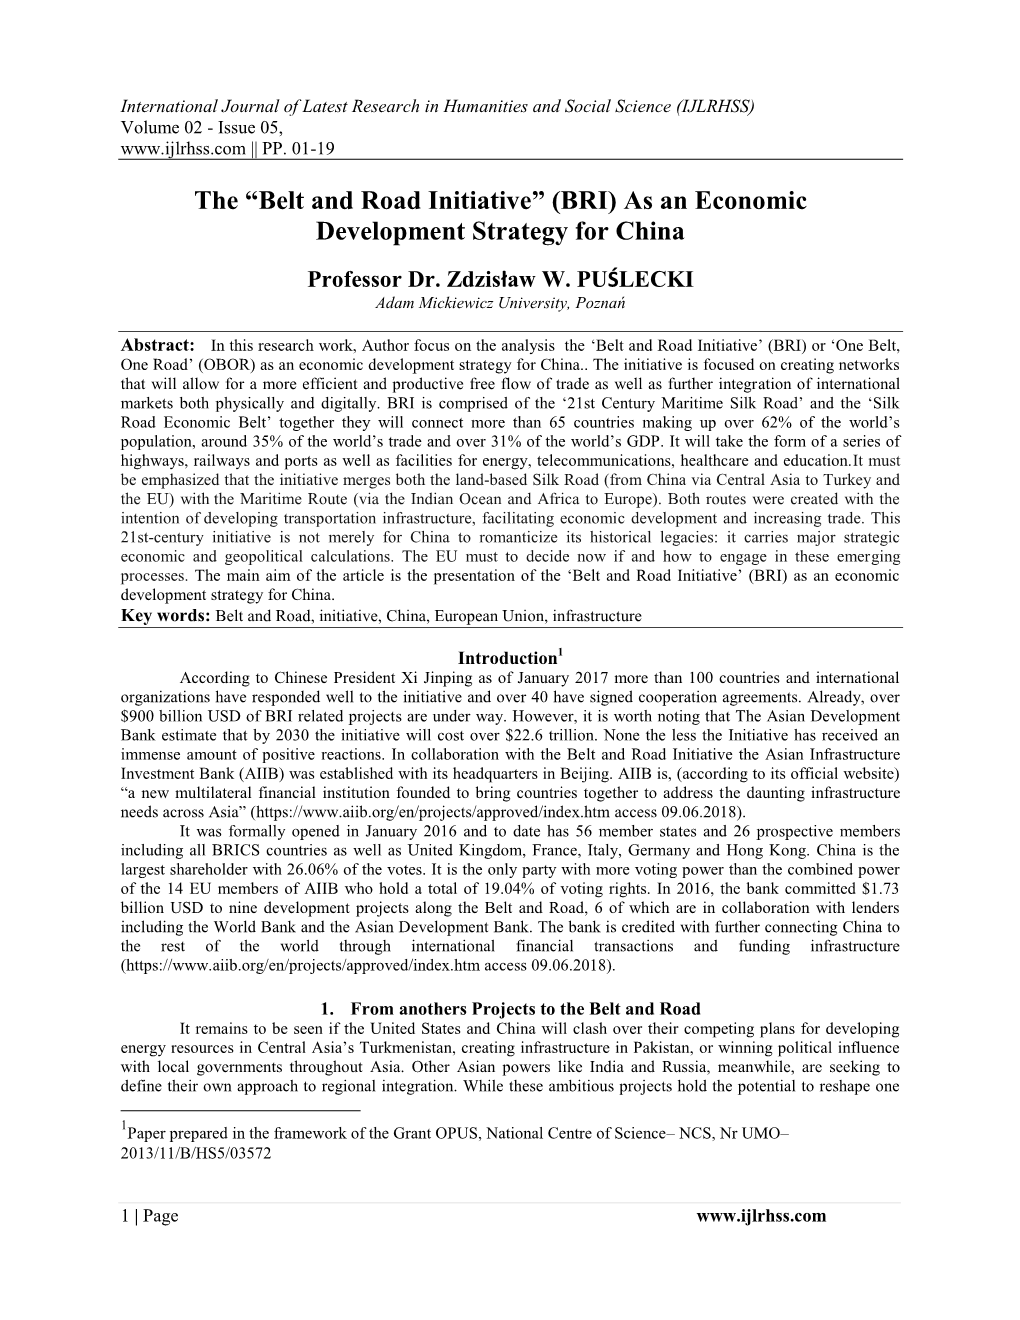 Belt and Road Initiative” (BRI) As an Economic Development Strategy for China